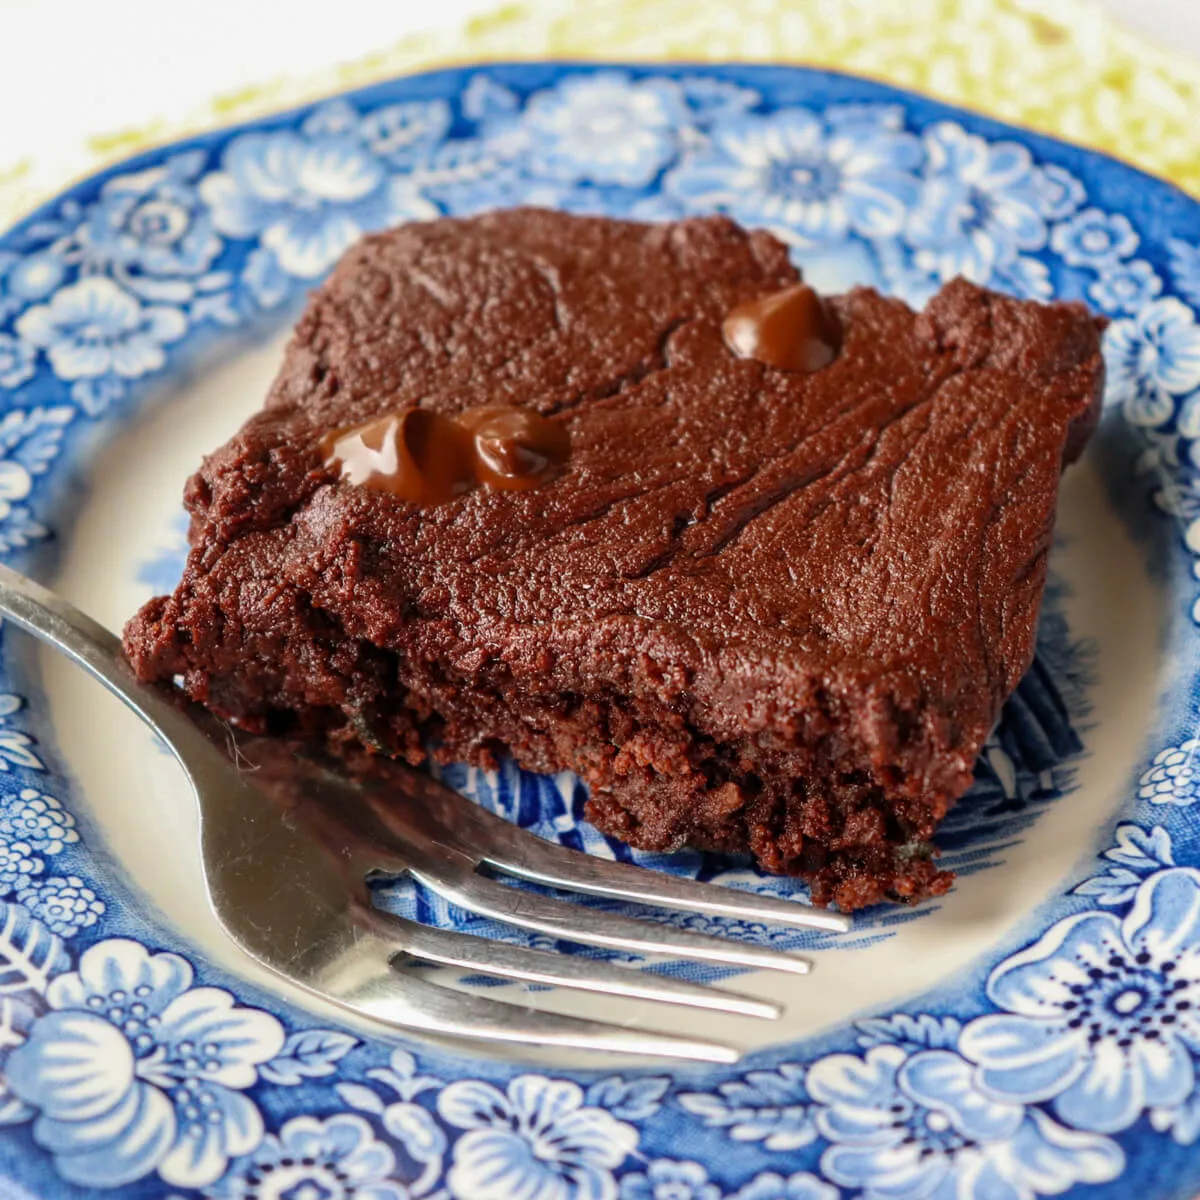 A keto zuccini brownie (low carb) on a blue and white plate with a fork next to it.